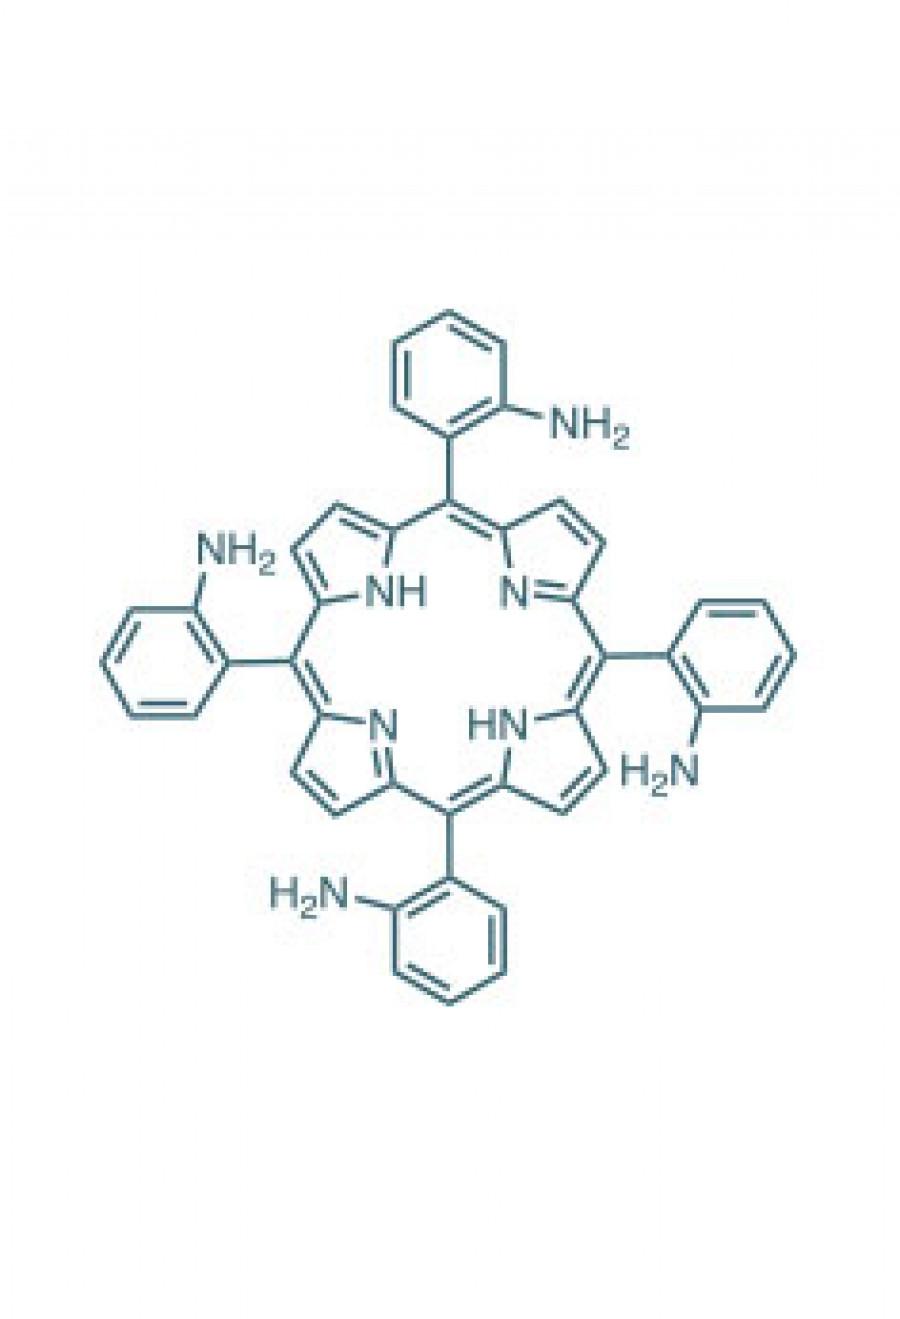 5,10,15,20-(tetra-2-aminophenyl)porphyrin  | Porphychem Expert porphyrin synthesis for research & industry